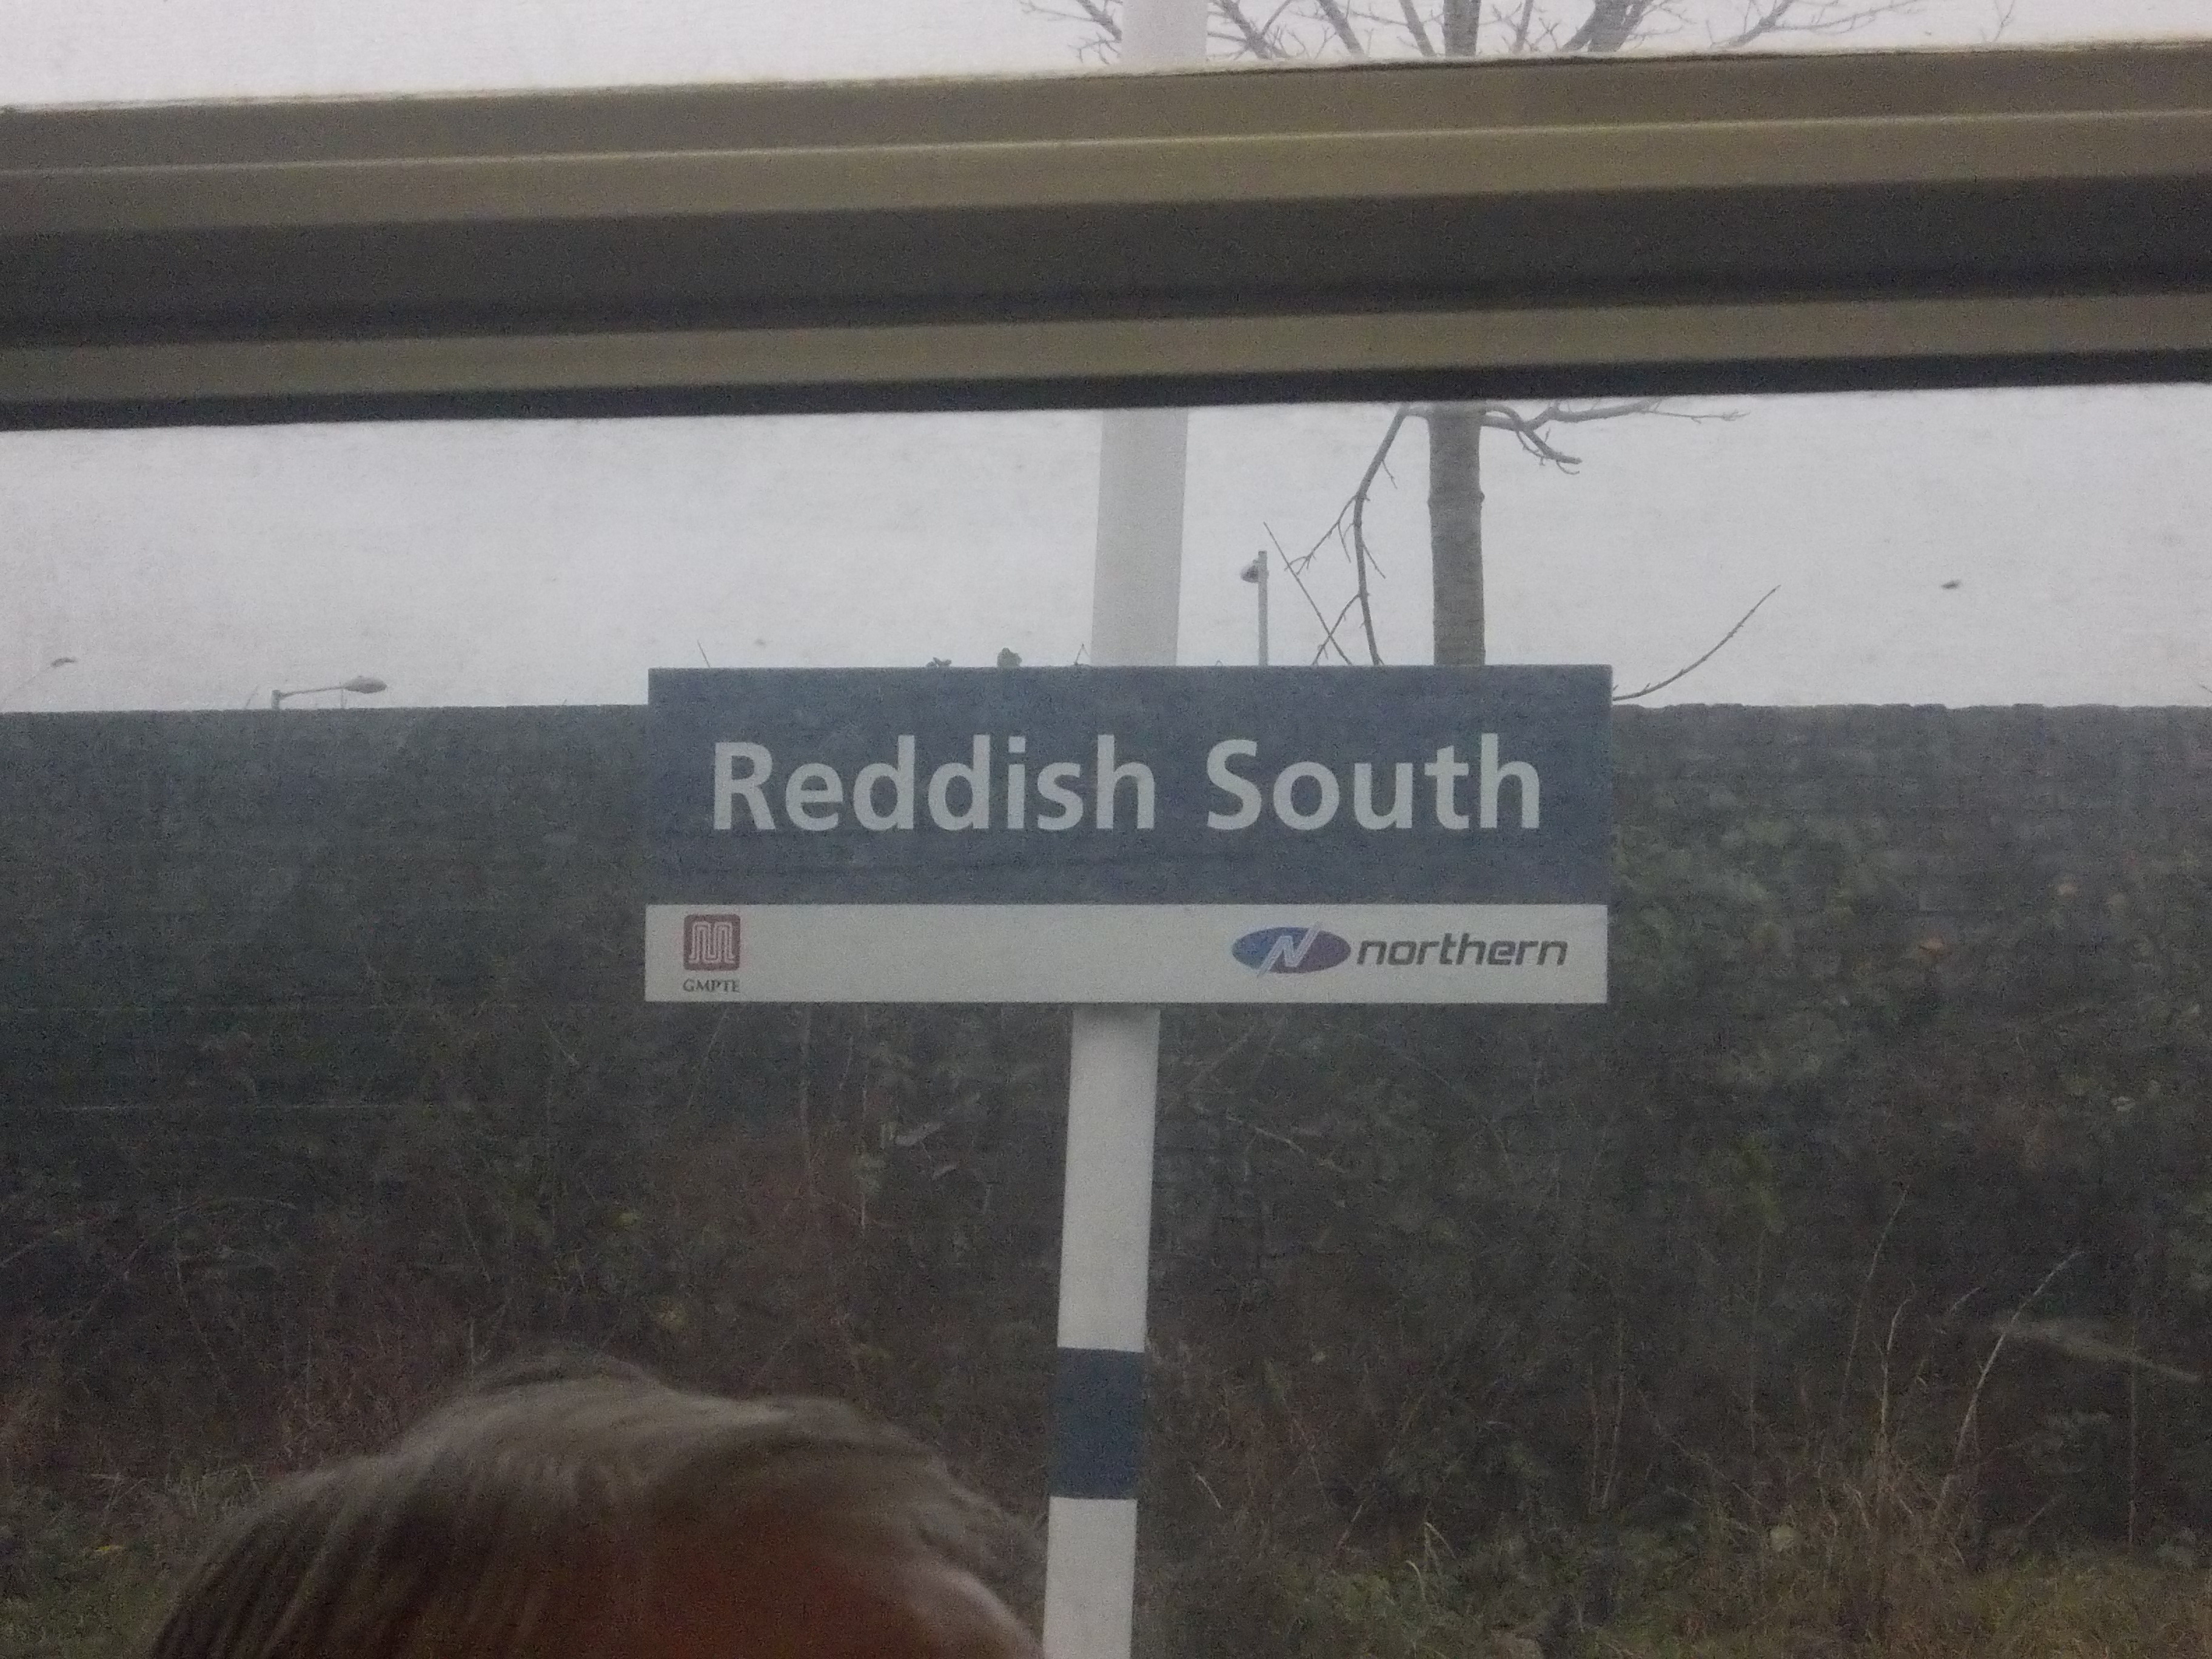 The sign at Reddish South. As expected, nobody was waiting here to get to such exotic places as Denton, Guide Bridge or Stalybridge.

To me, it seem